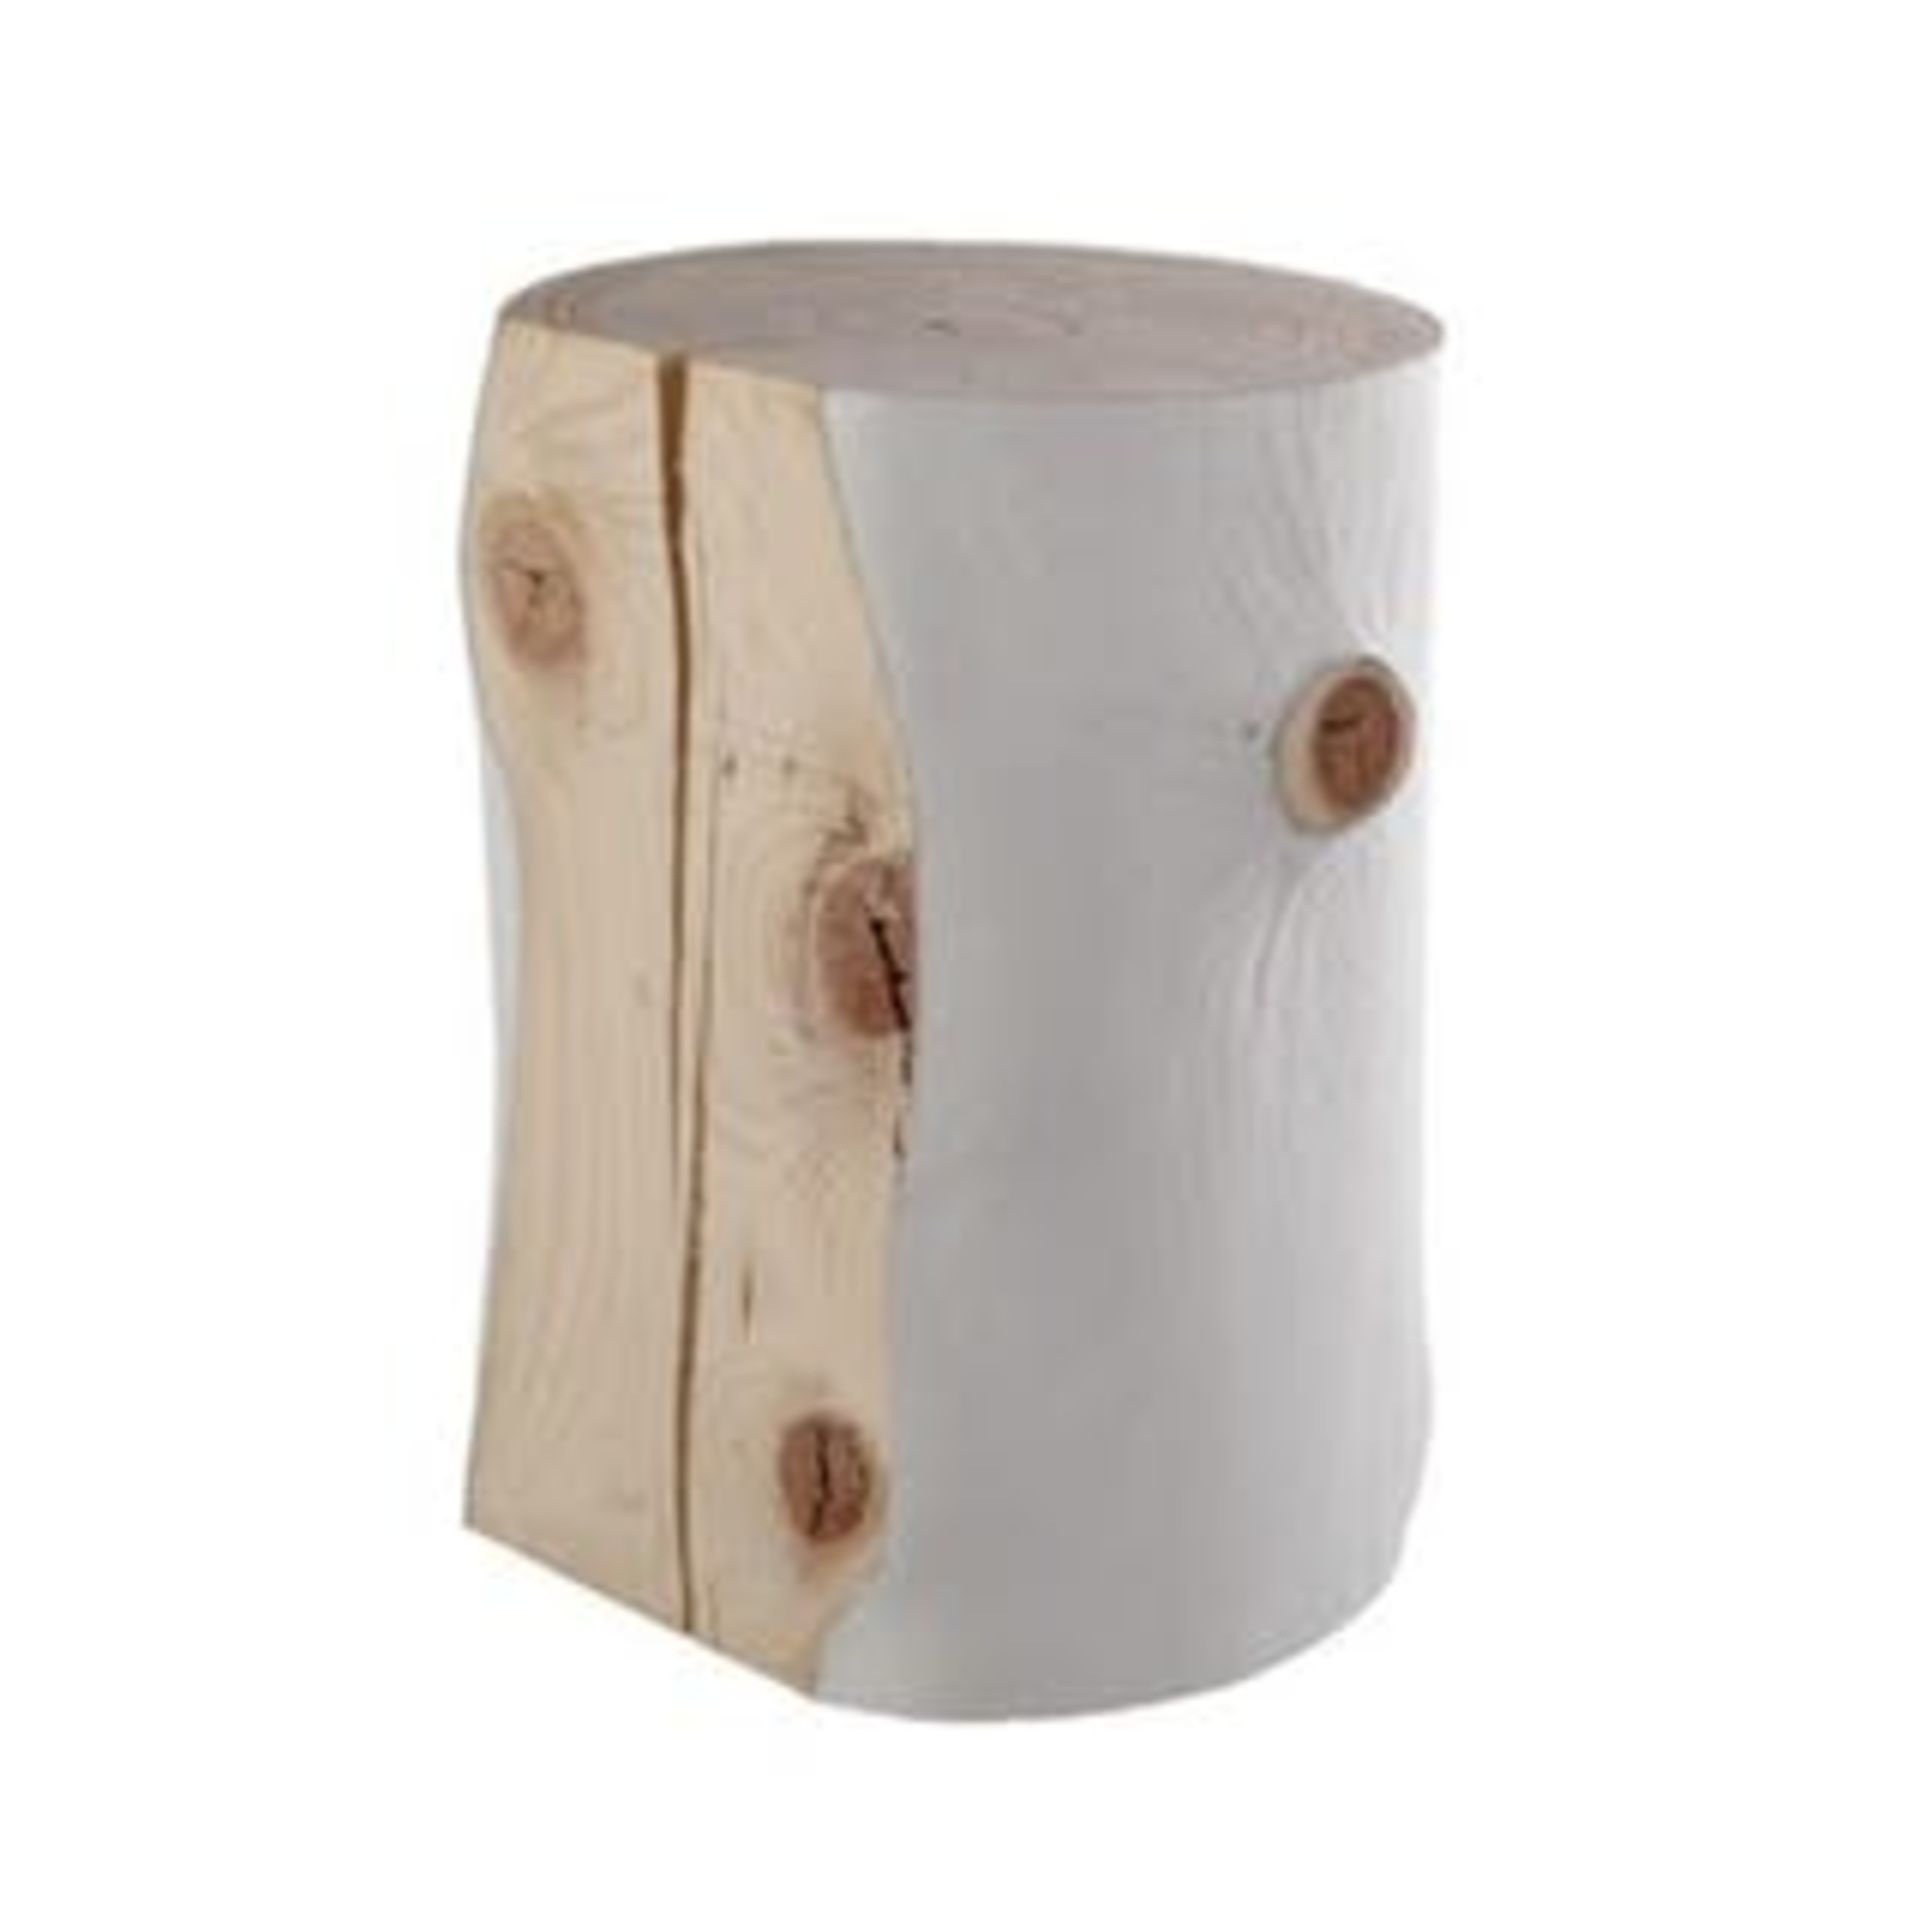 Bleu Nature F252 Logglove Occasional Table / Stool White Pebble Leather 40 x 37 x 45cm RRP £1350 (